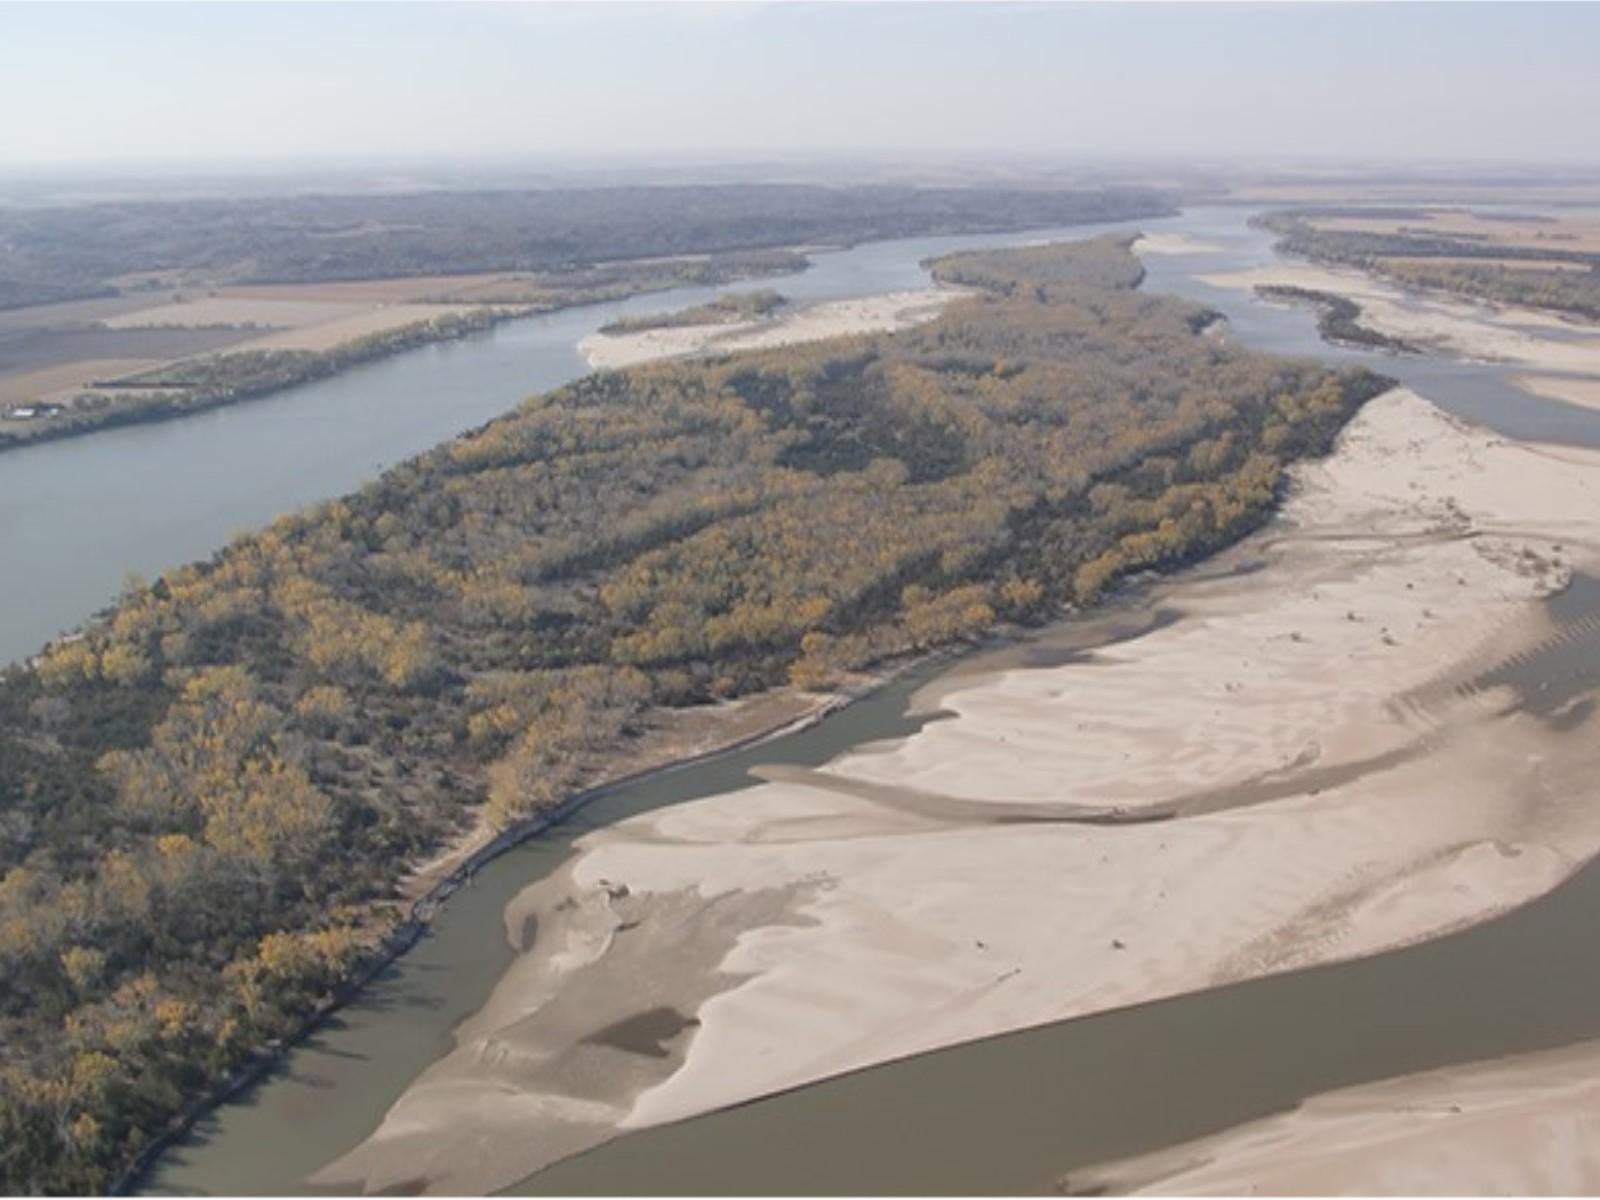 Aerial view of Goat Island featuring sandbars and parallel channels of the Missouri River